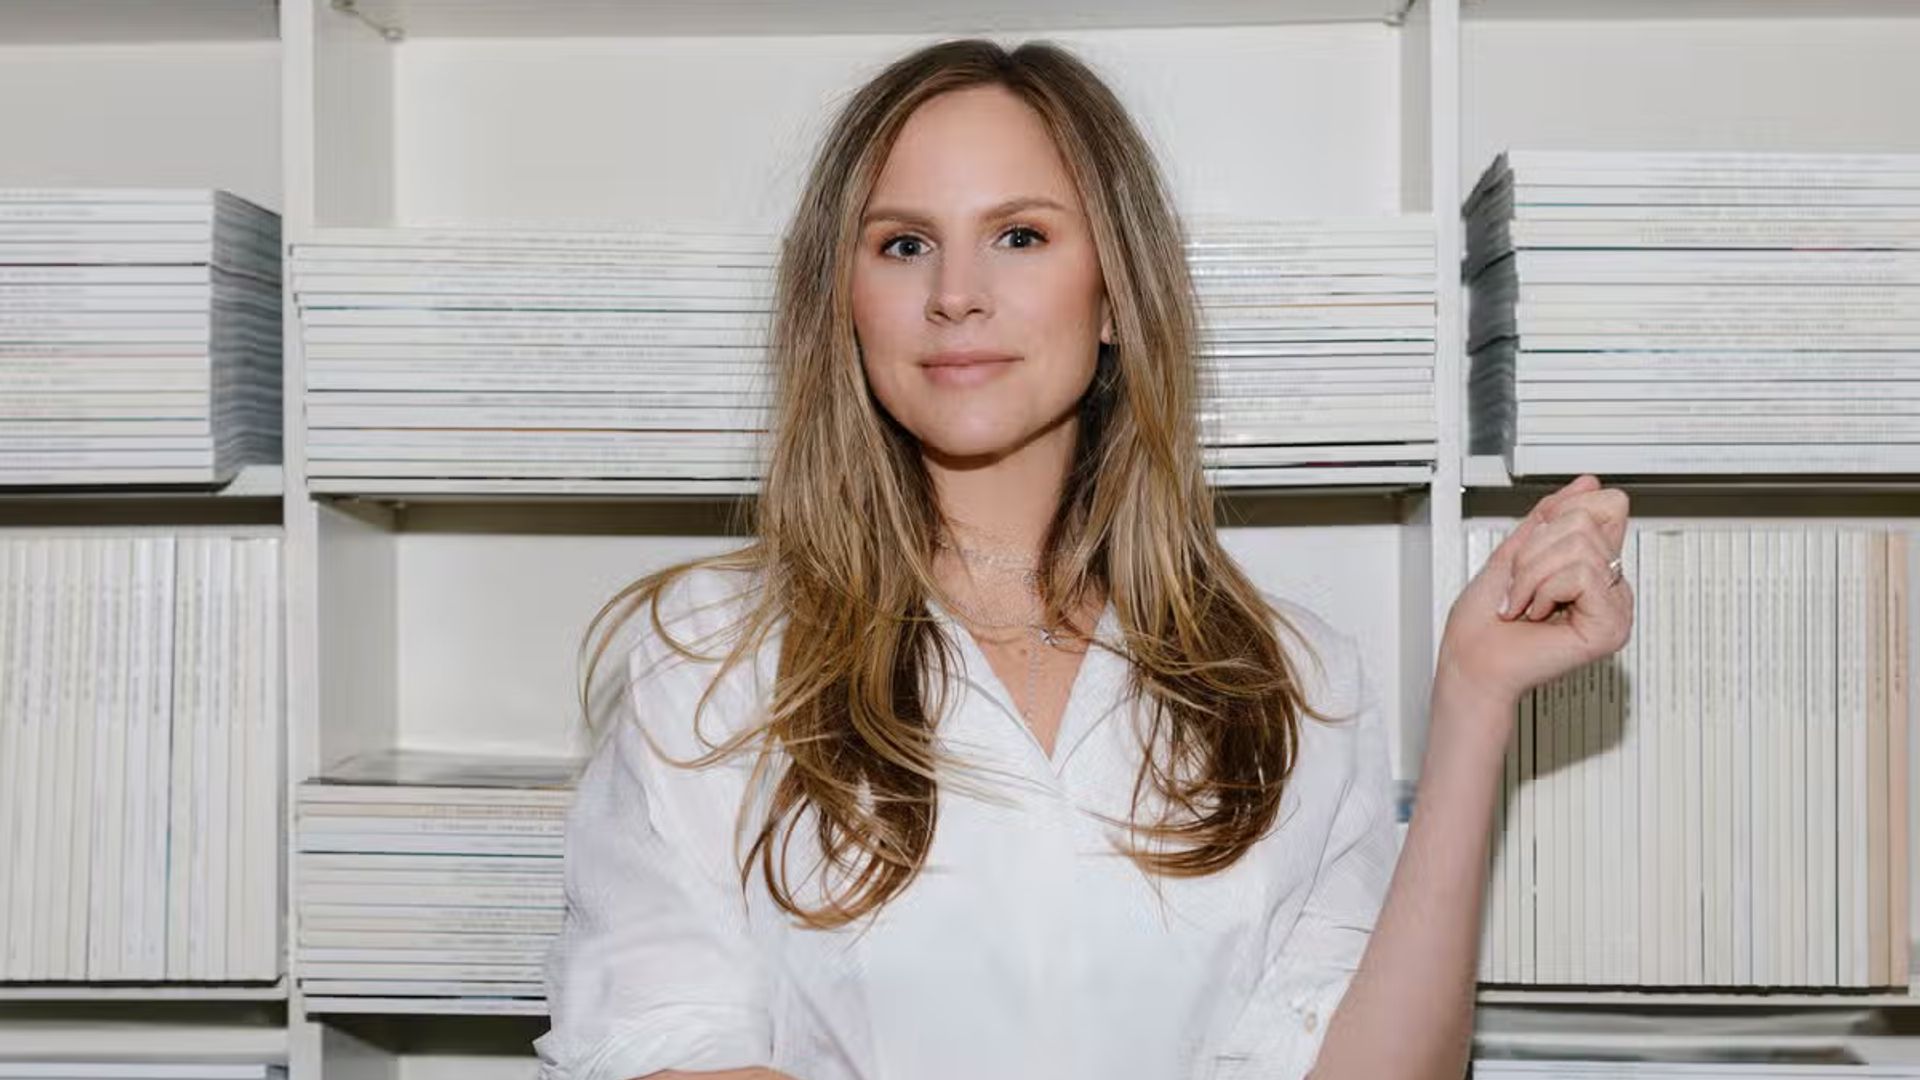 Meet Ruuby founder Venetia Archer, the woman revolutionising at-home beauty treatments